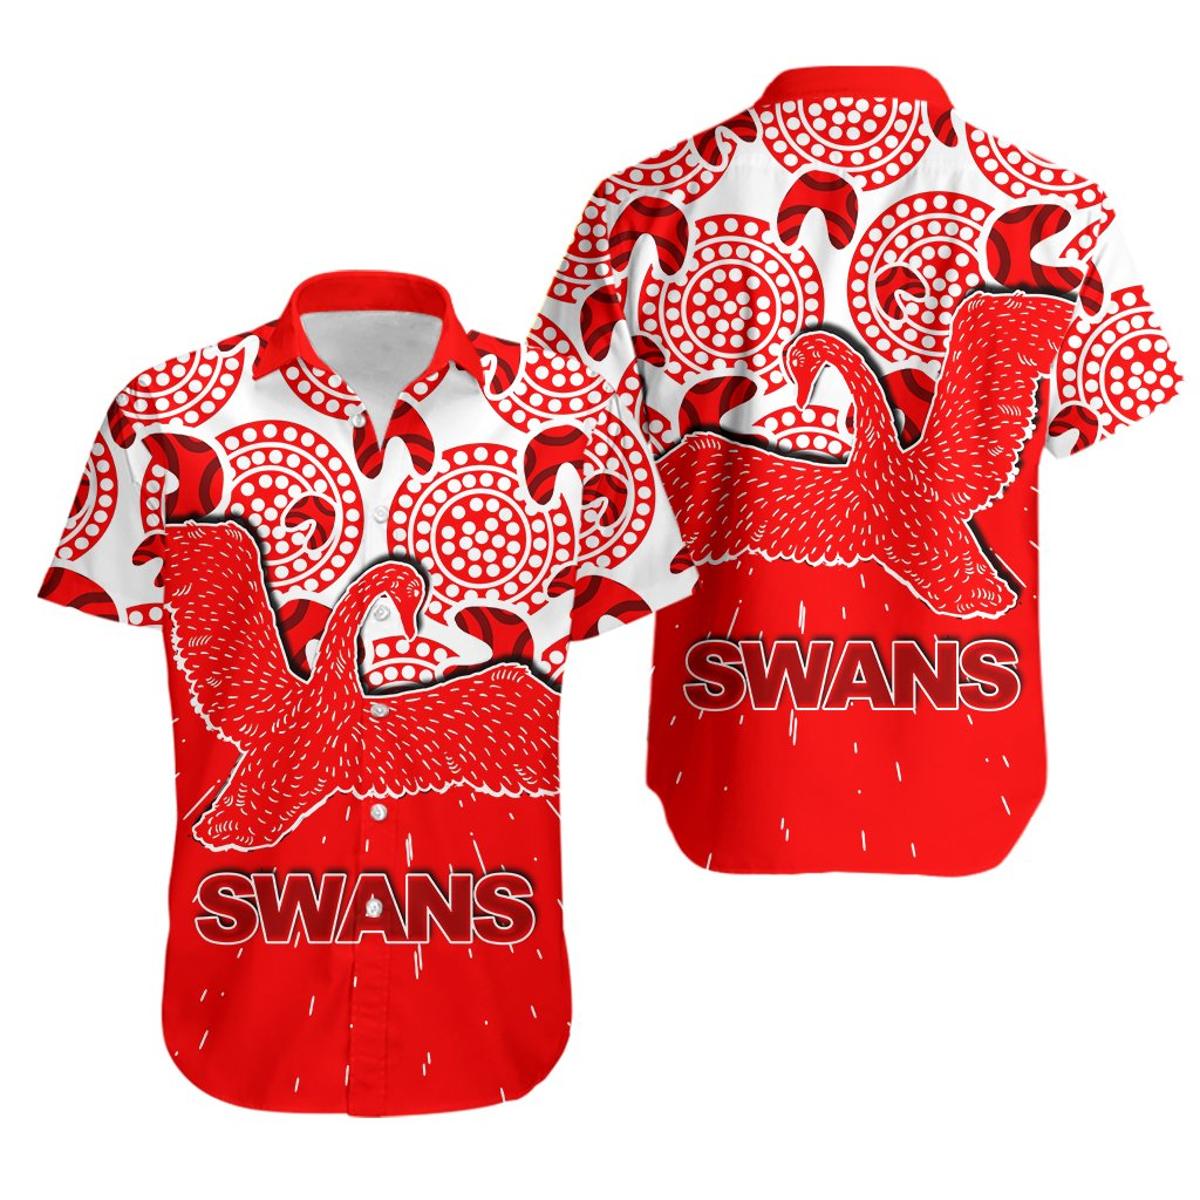 Afl Sydney Swans Symbol Anzac Day Indigenous Style Aloha Shirt Size From S To 5xl